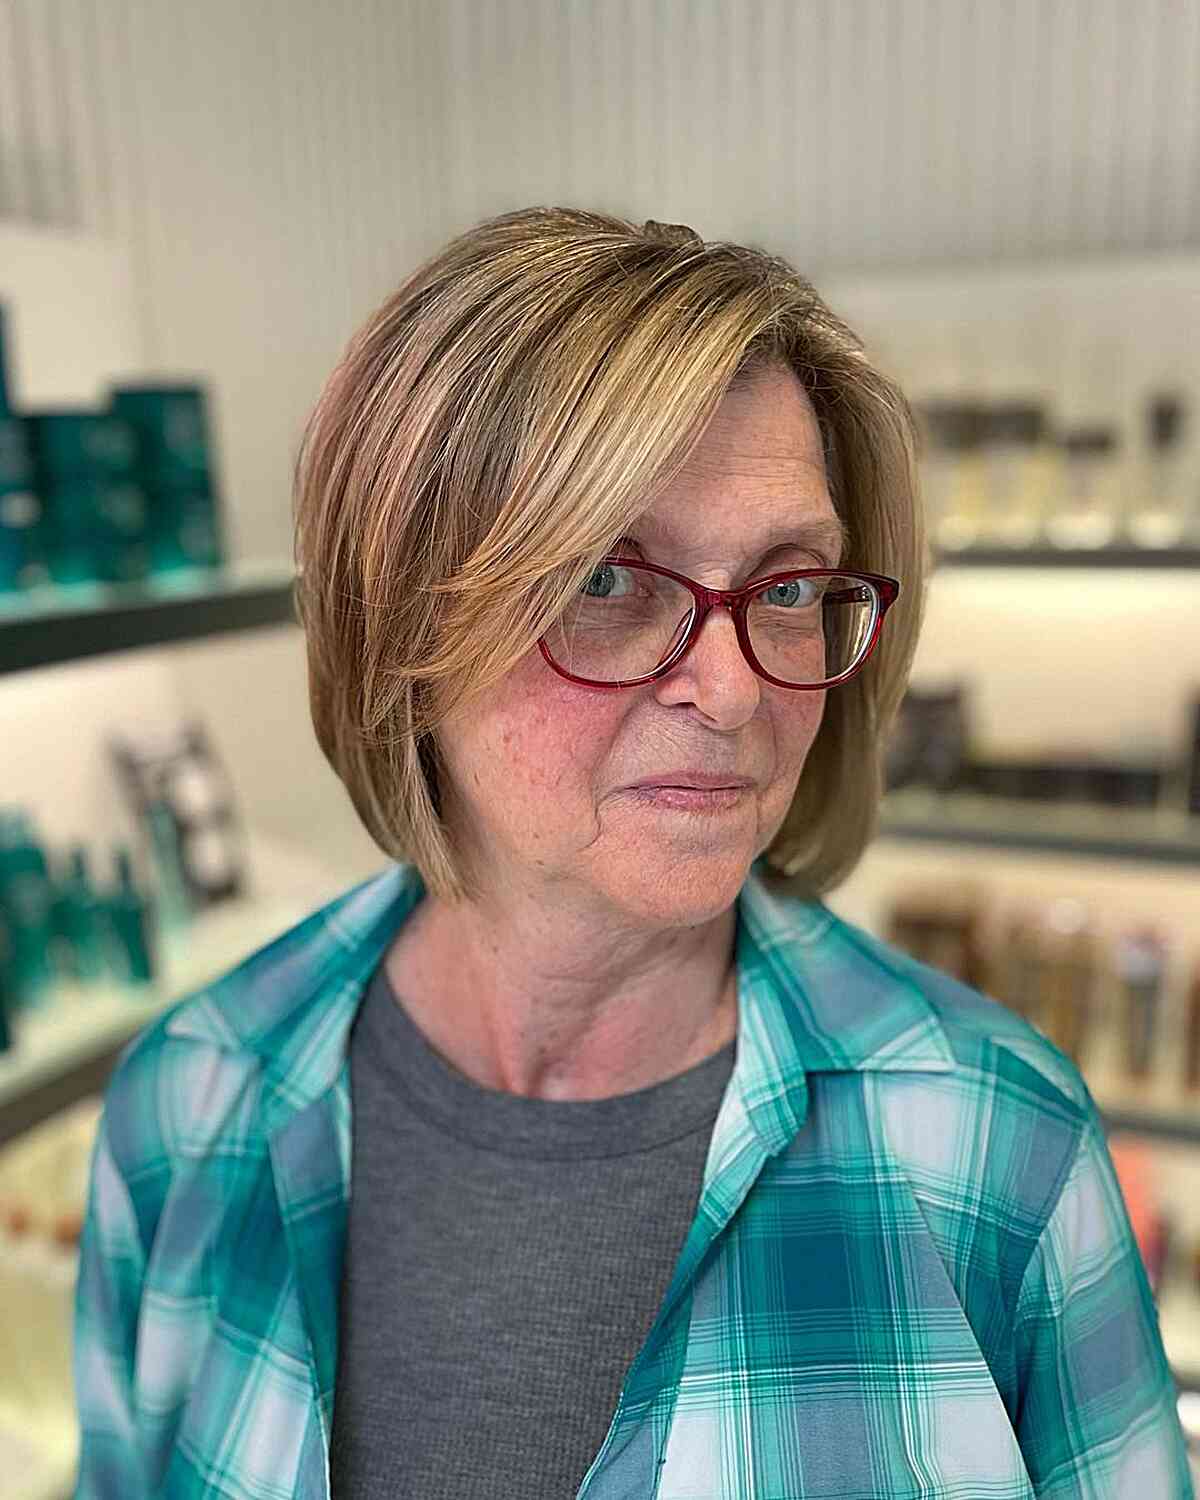 Short Chin-Length Hairstyles for Over 50 with Glasses